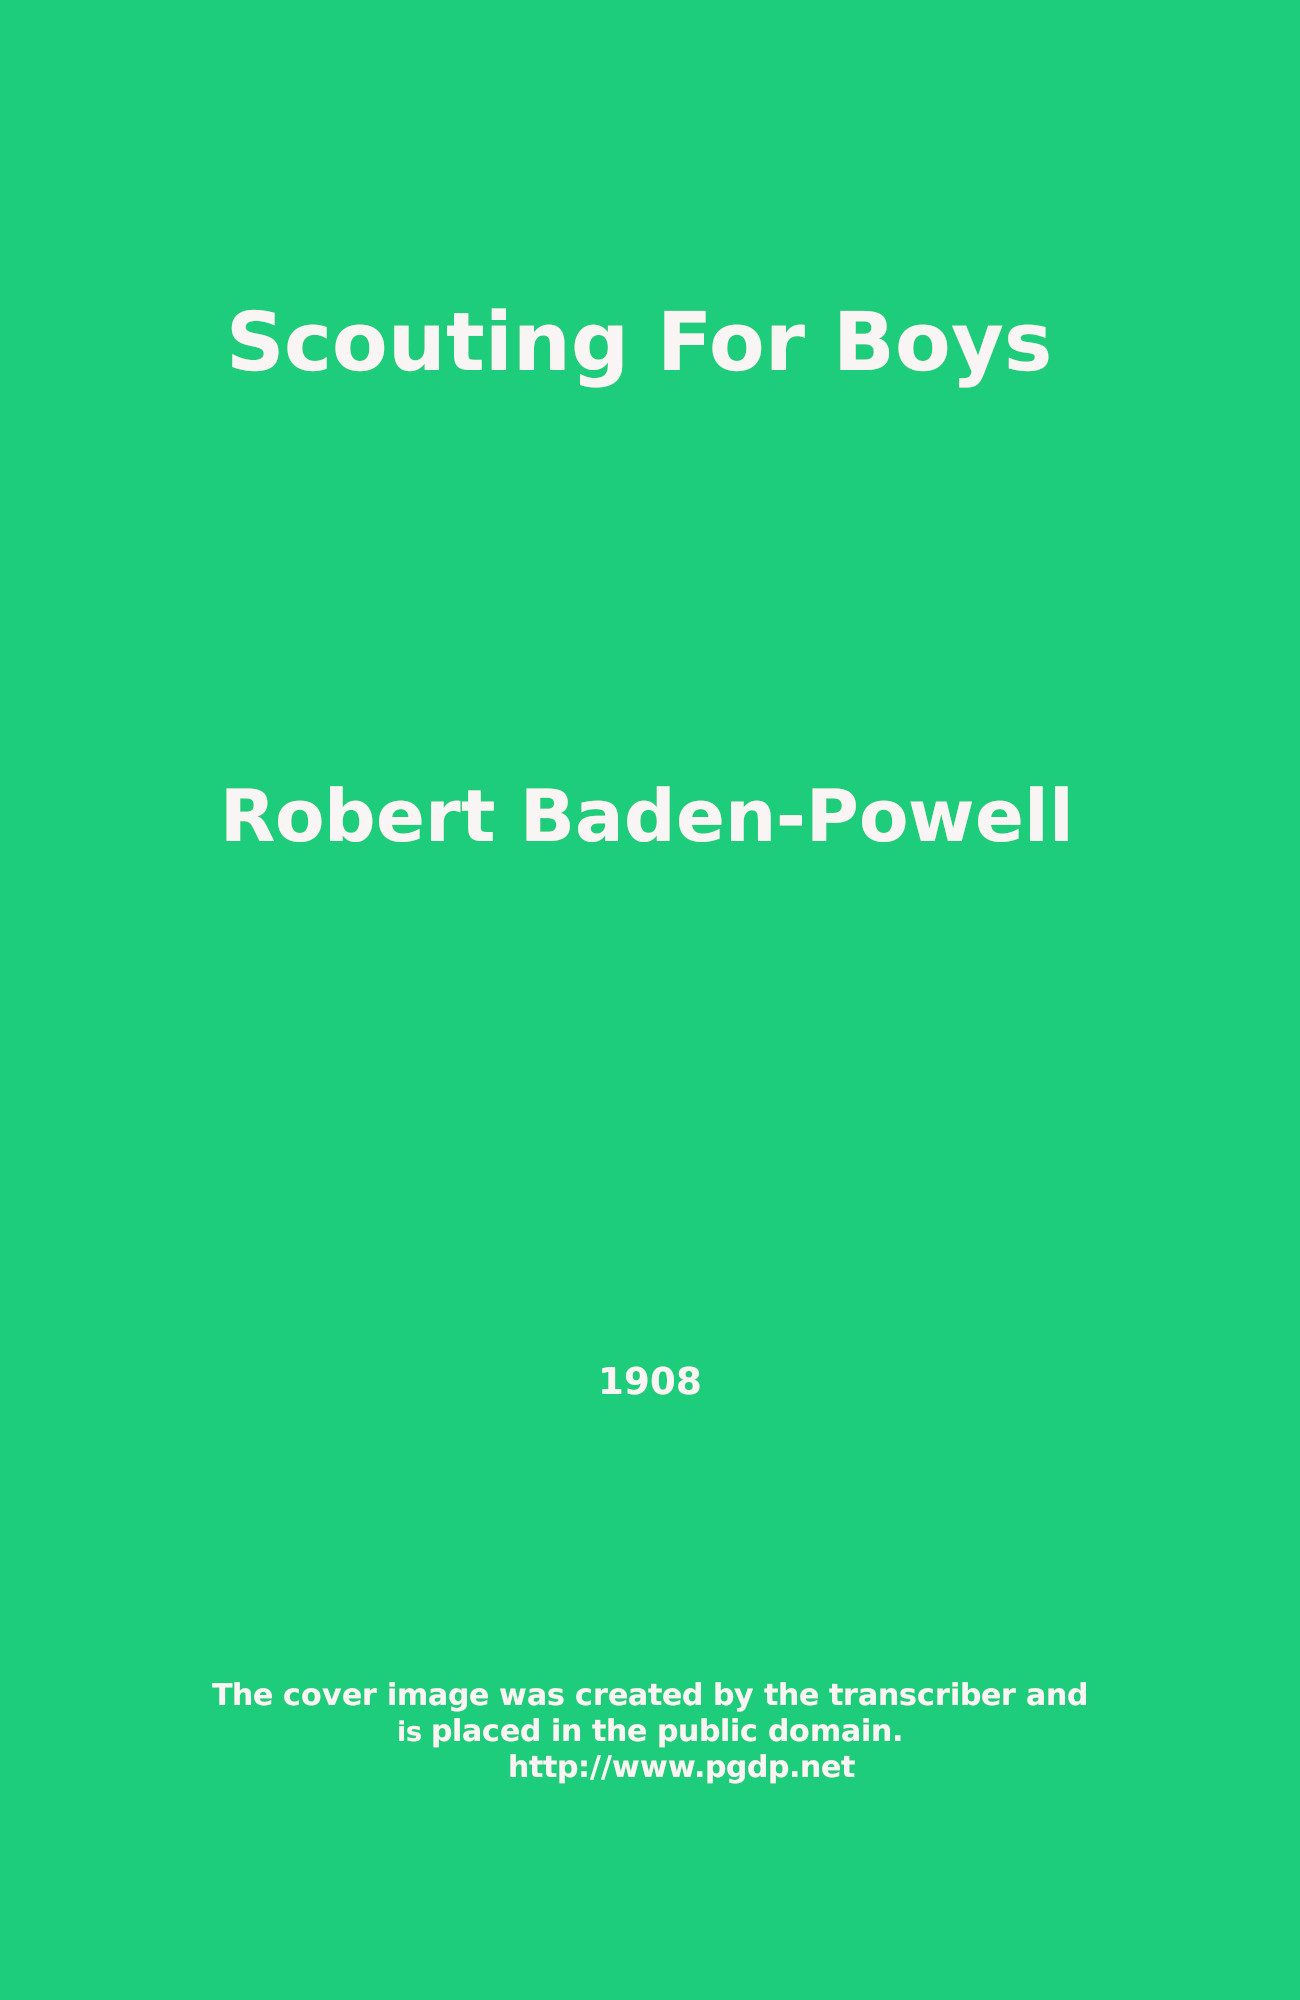 The Project Gutenberg eBook of Scouting for Boys, by Robert Baden-Powell